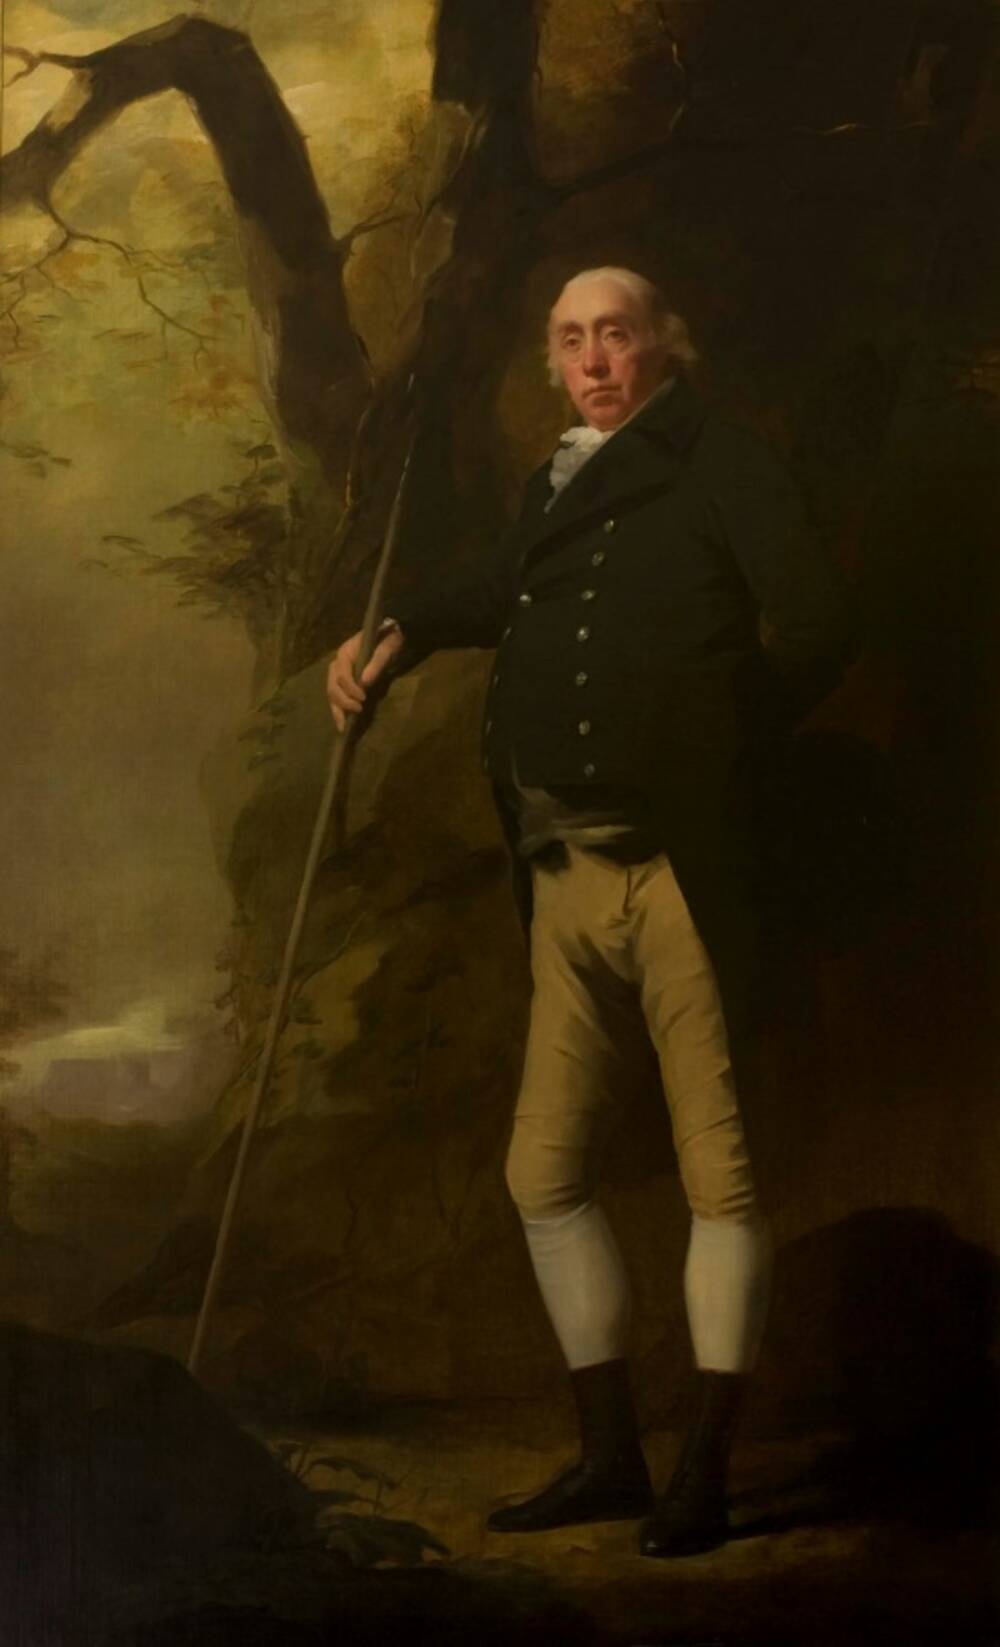 A portrait of a Georgian gentleman dressed formally, standing at the edge of woods and holding a long staff.